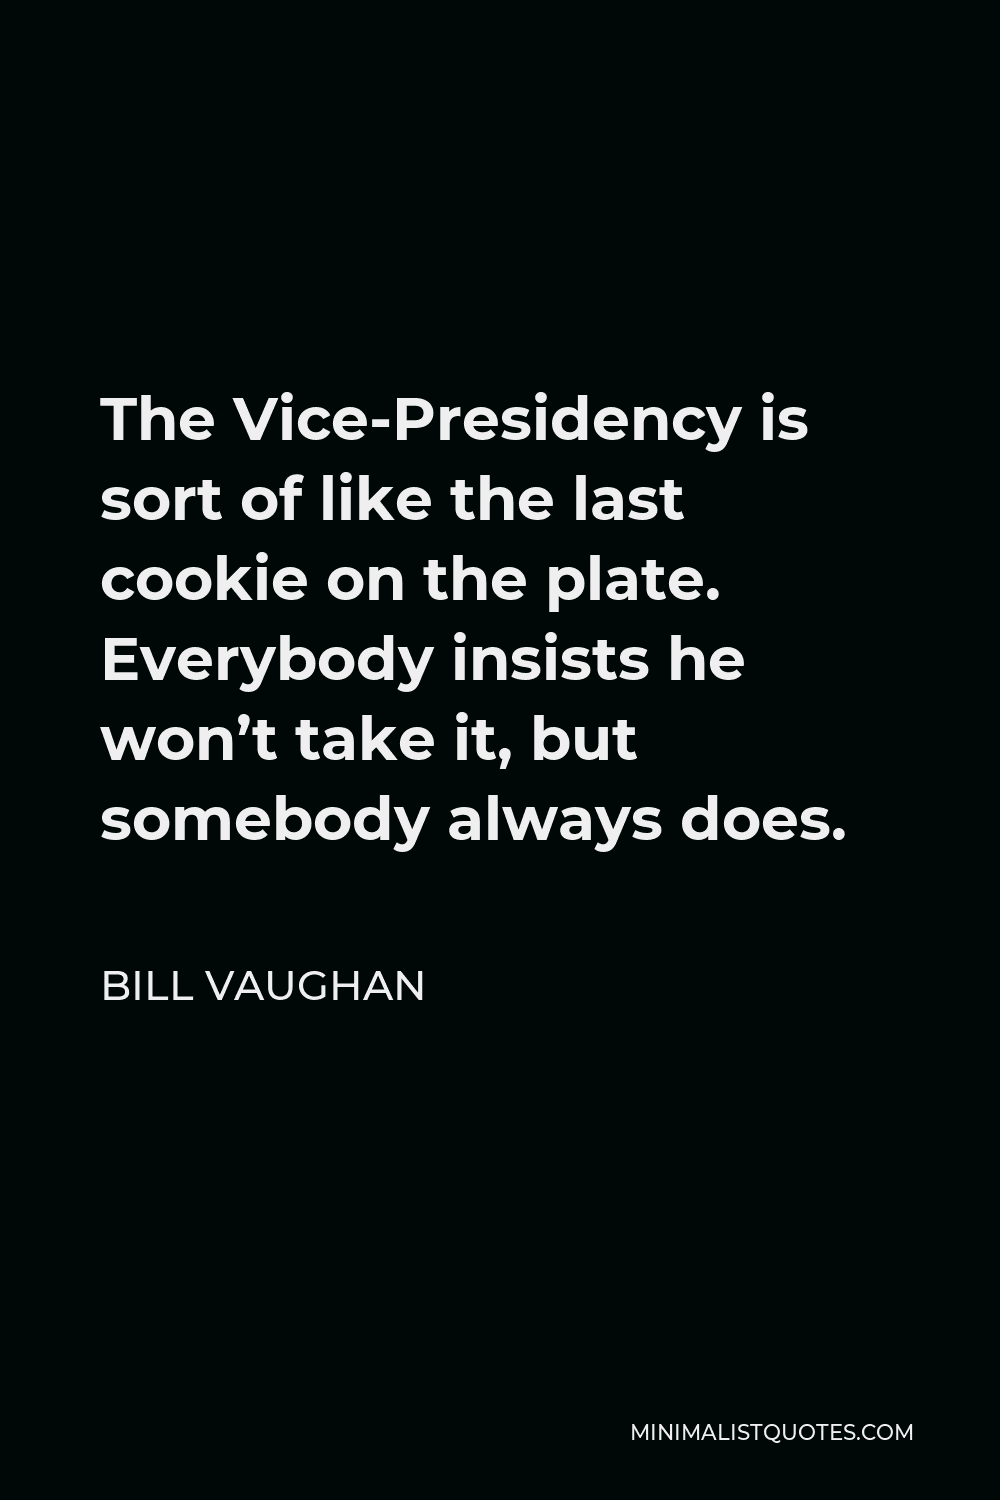 Bill Vaughan Quote - The Vice-Presidency is sort of like the last cookie on the plate. Everybody insists he won’t take it, but somebody always does.